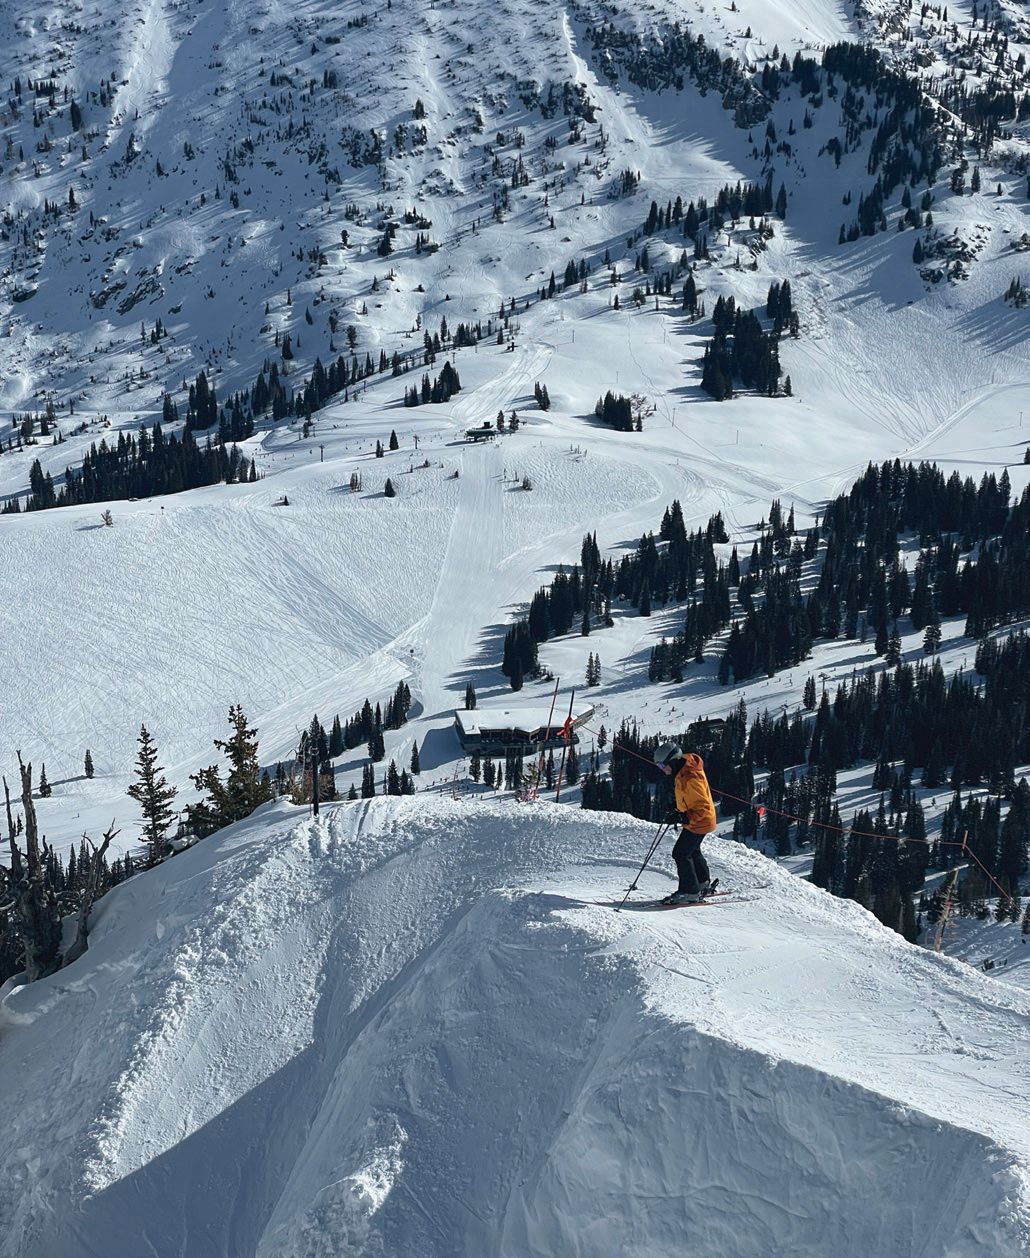 Ski With Kim offers lessons as well as an all-women’s ski adventure. PHOTO: BY KIM REICHHELM